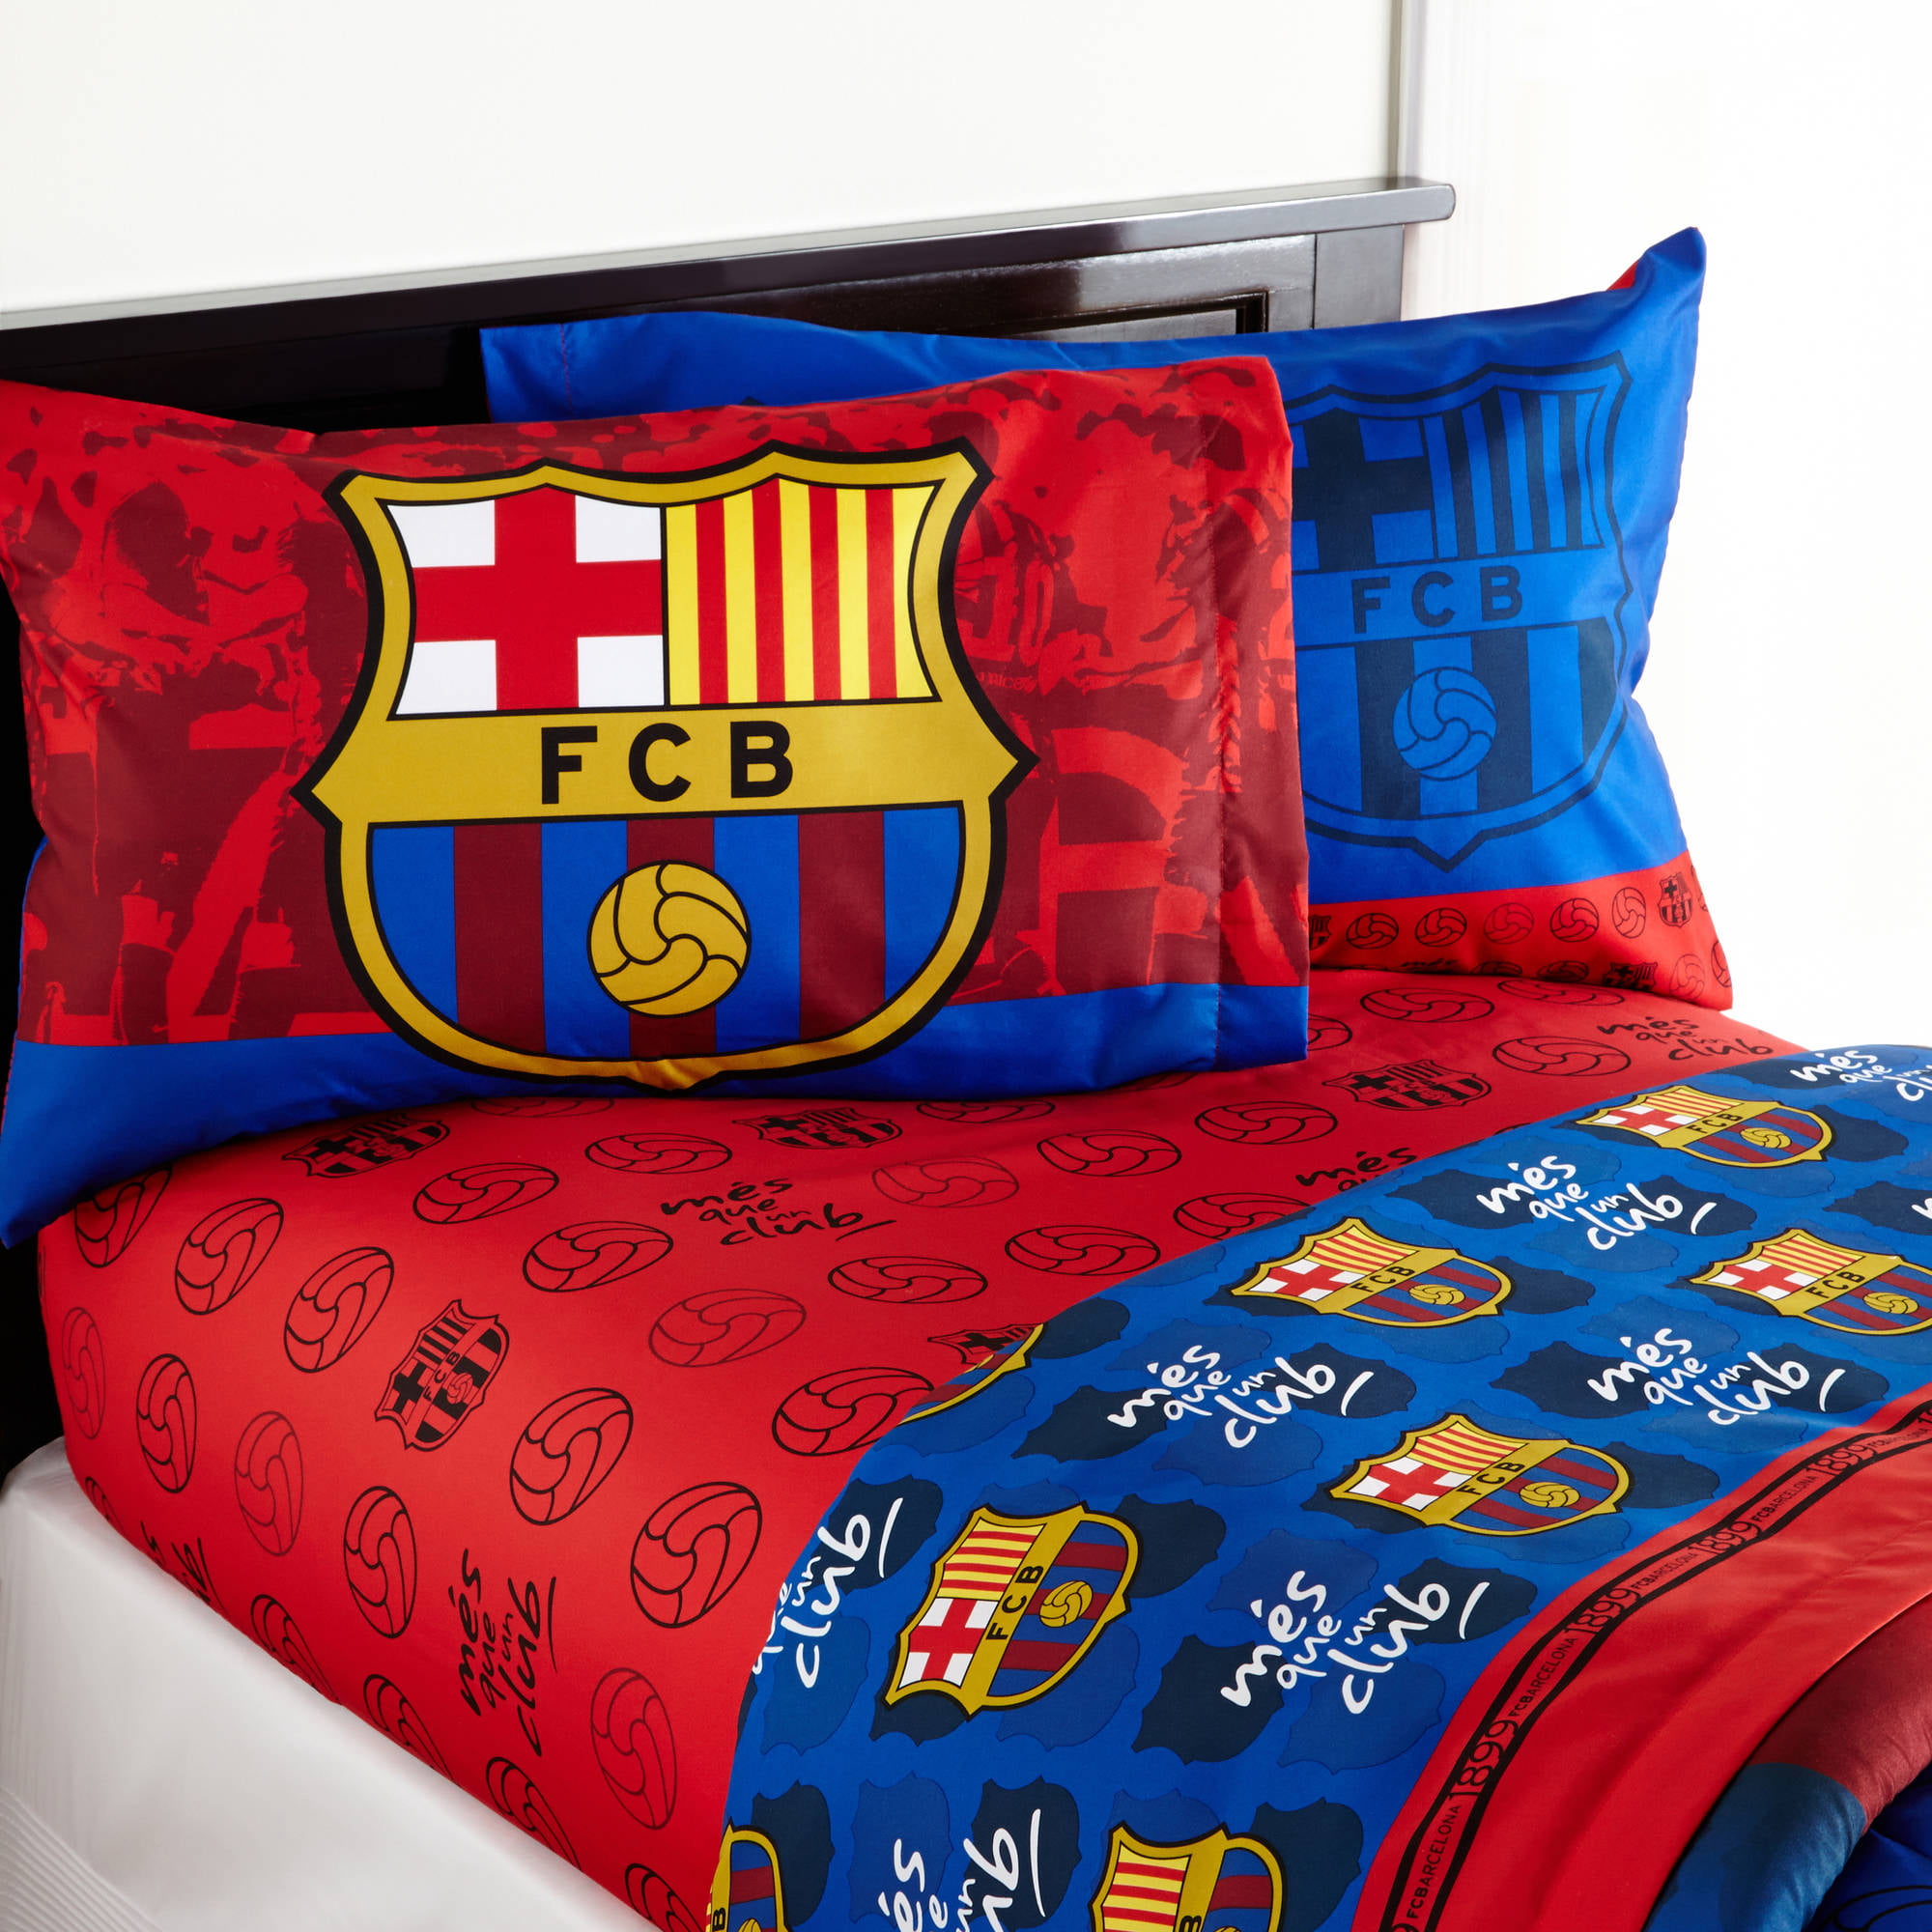 Bed Sheet Comforter BC002 Set A+1 Twin Size Pillow Case Barcelona Fc Football Club Official Licensed Bedding Set Bolster Case